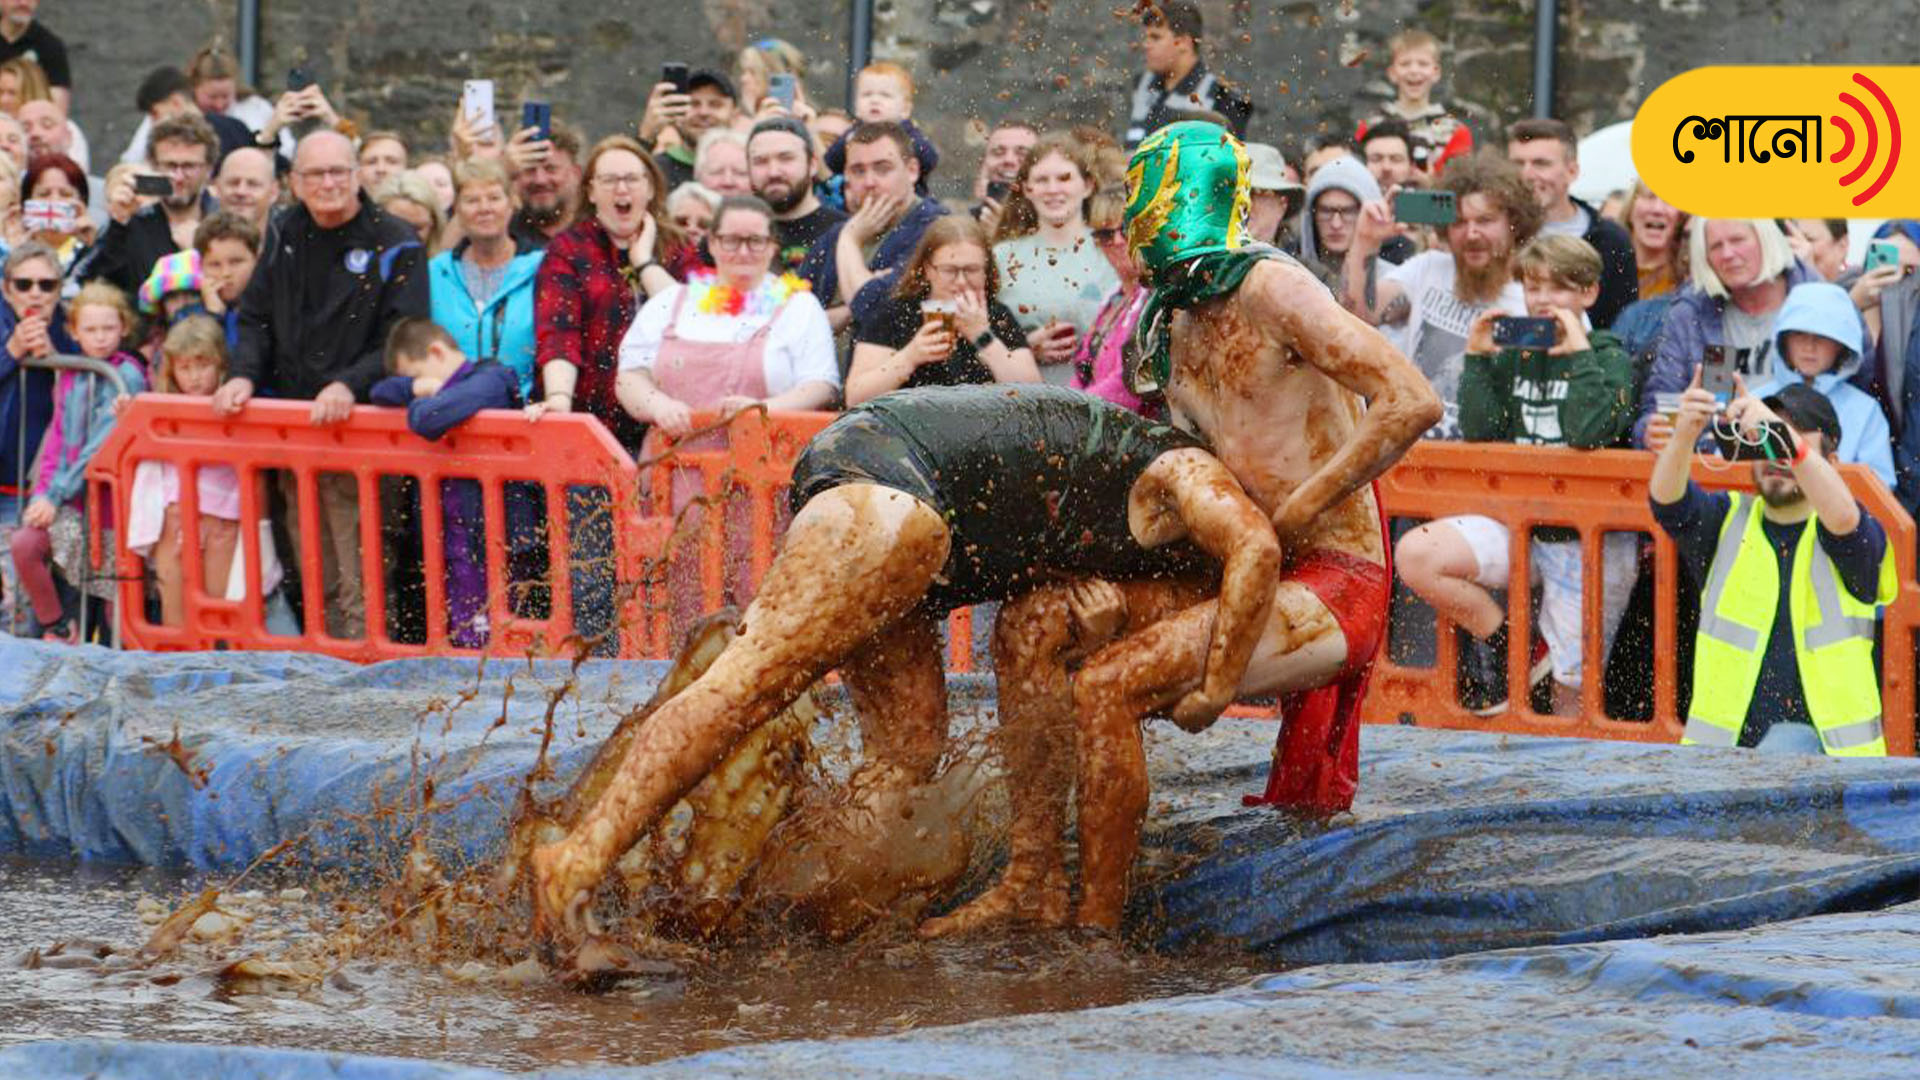 People wrestle in gravy to win the world championship title. Watch